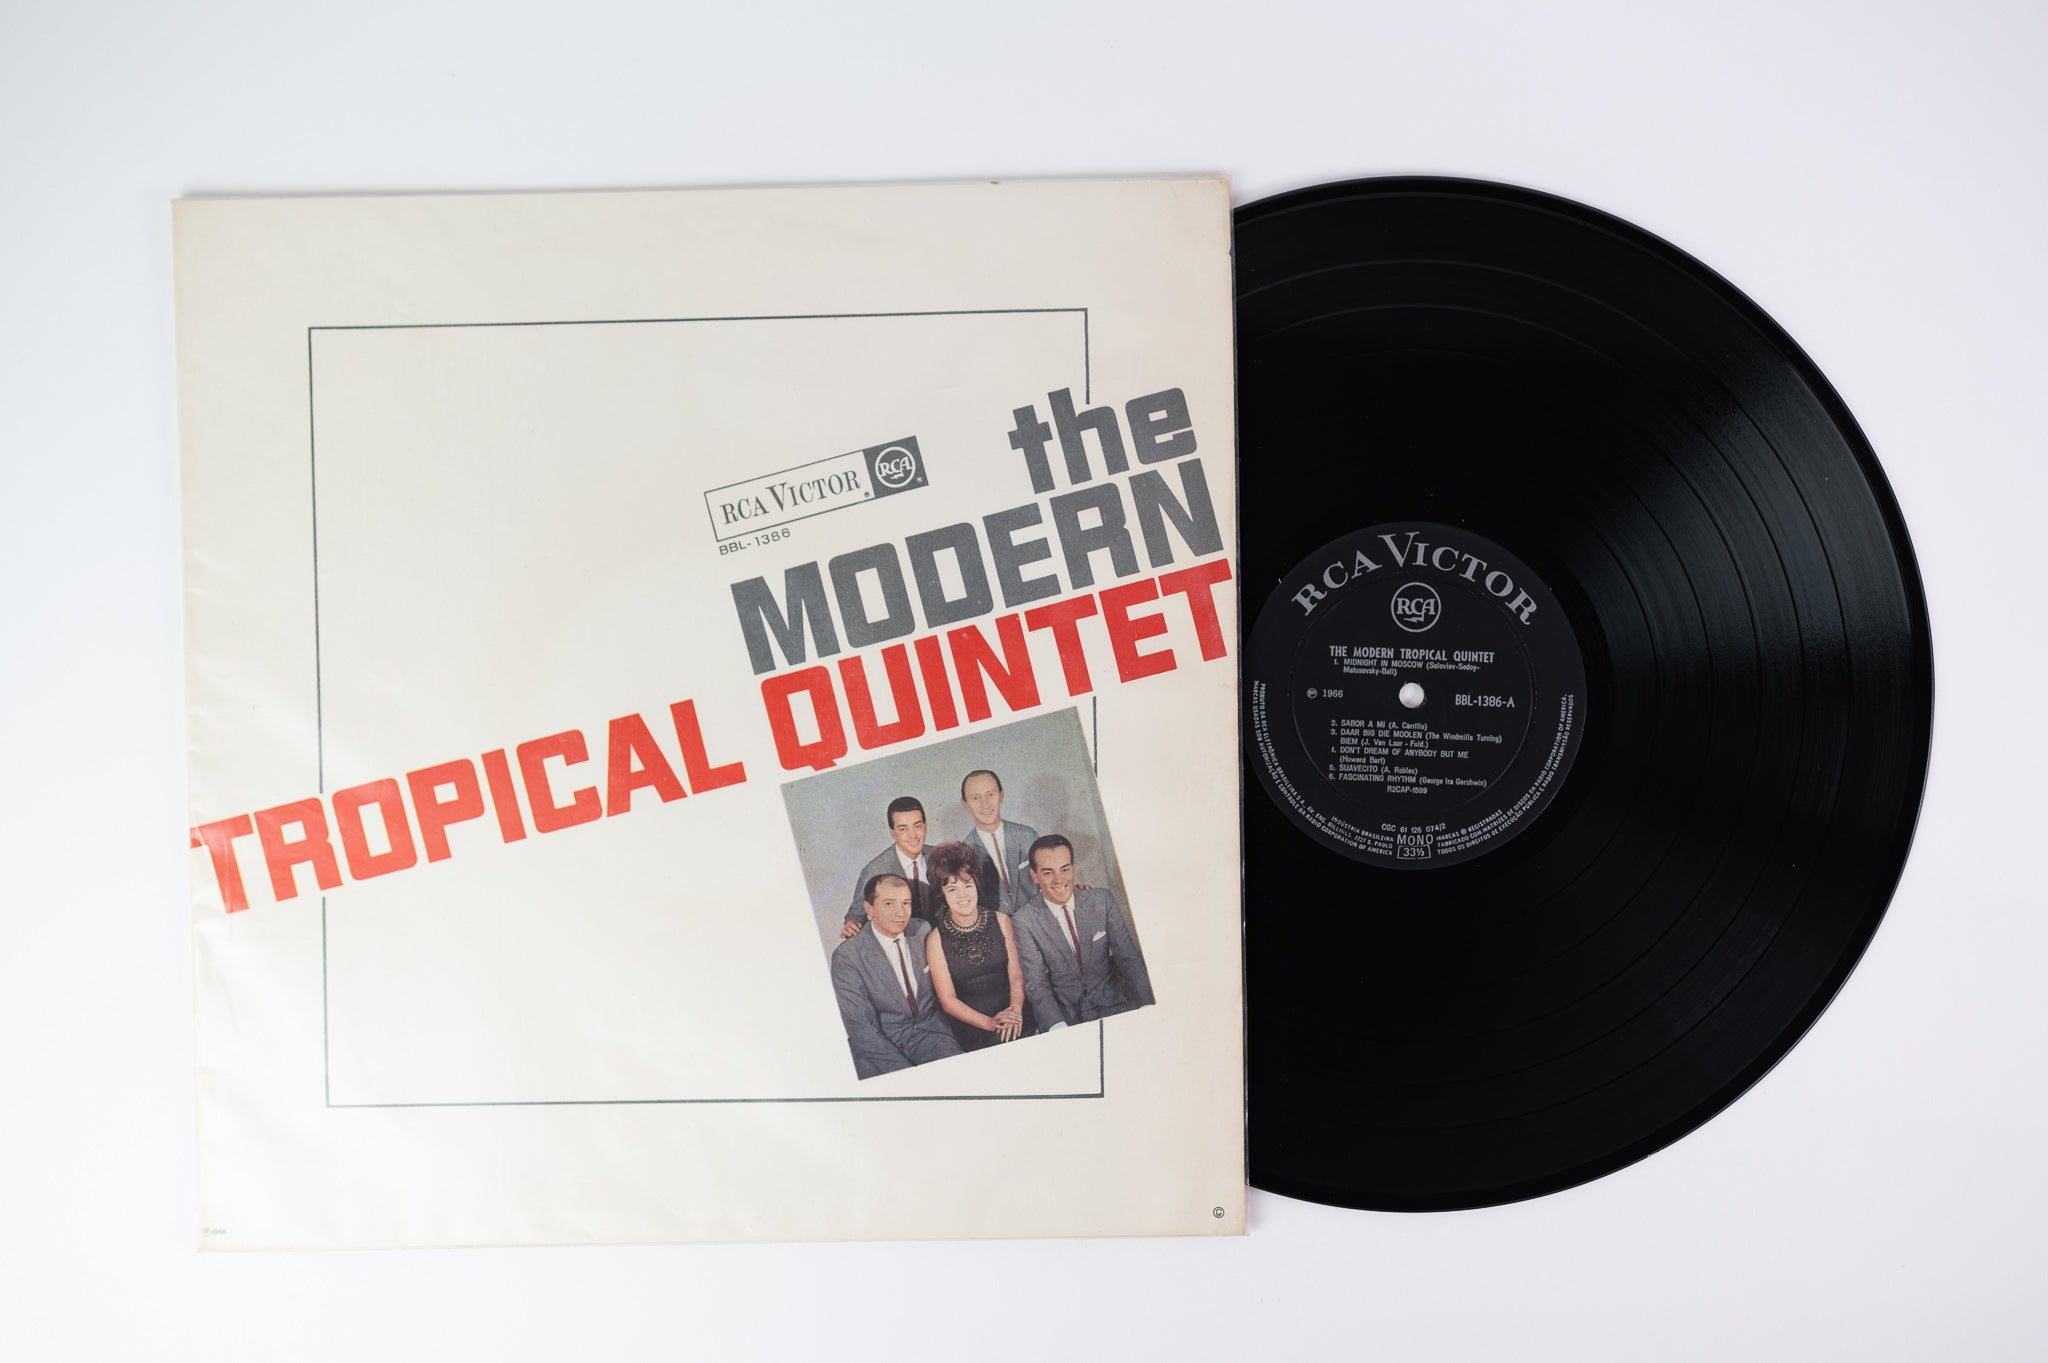 The Modern Tropical Quintet - The Modern Tropical Quintet S/T on RCA Victor Brazilian Pressing